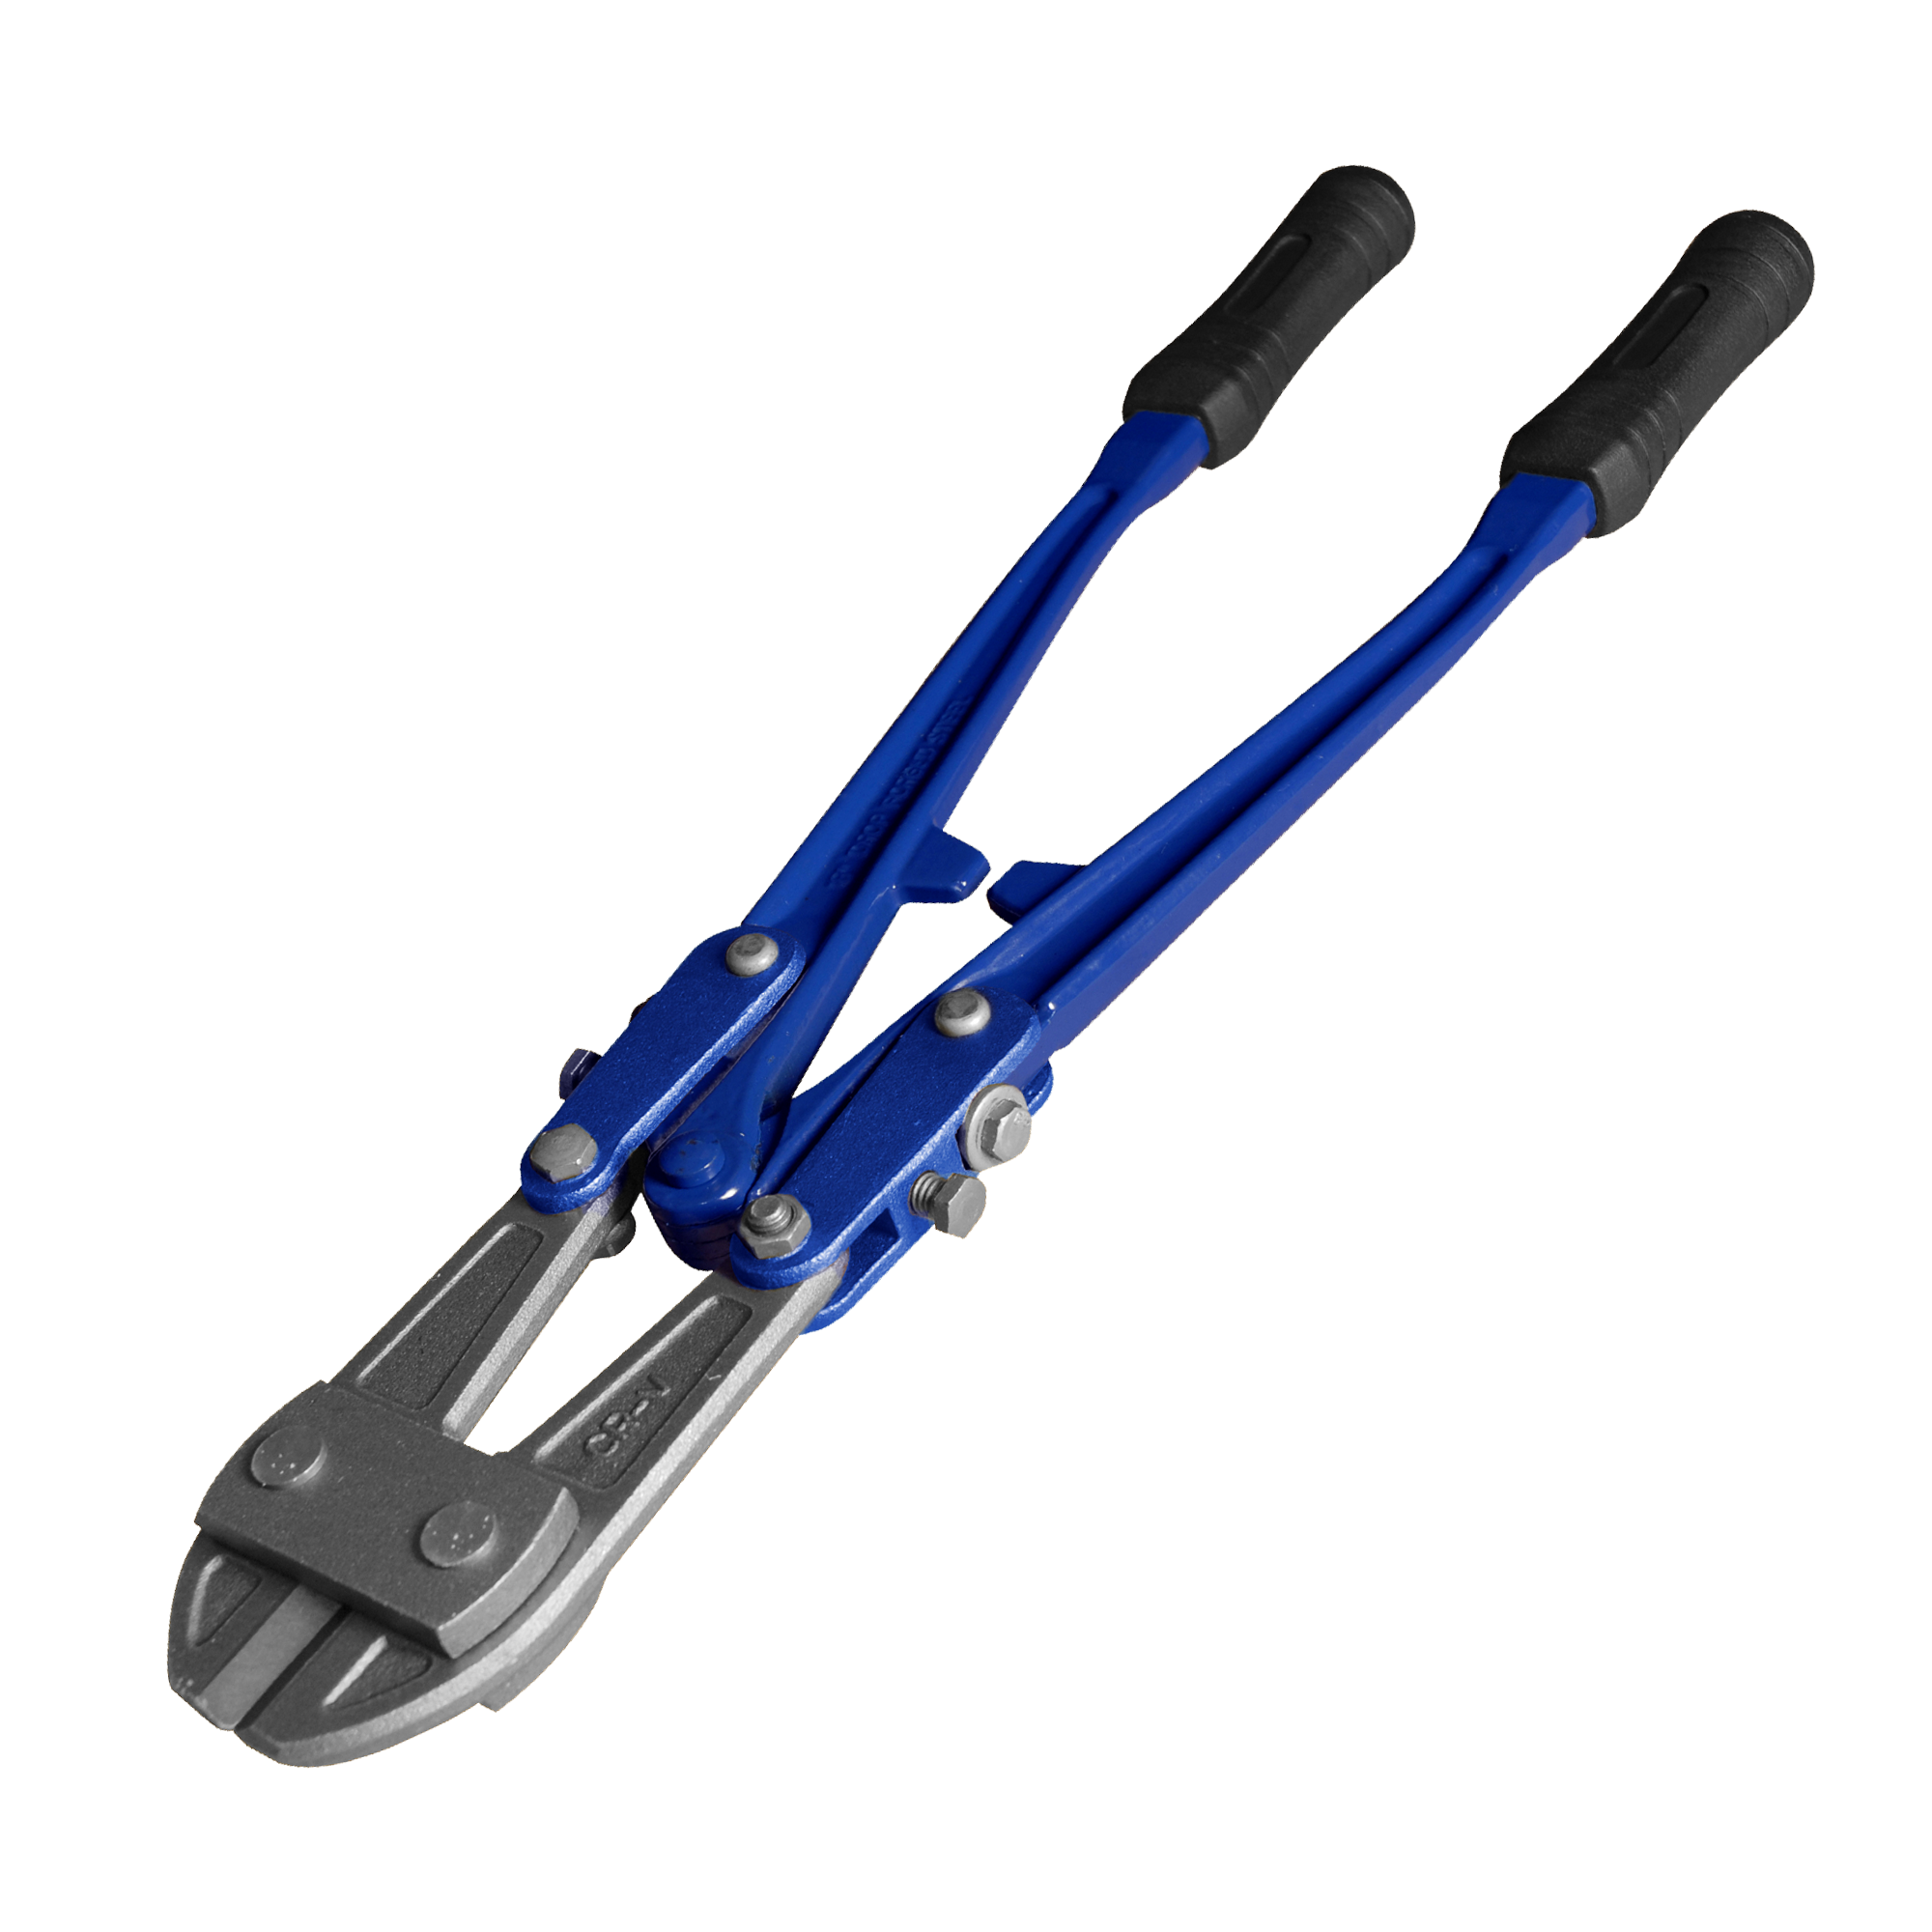 Bolt Cutter Solid Forged Professional 18"- EC-EFBC18 by Eclipse